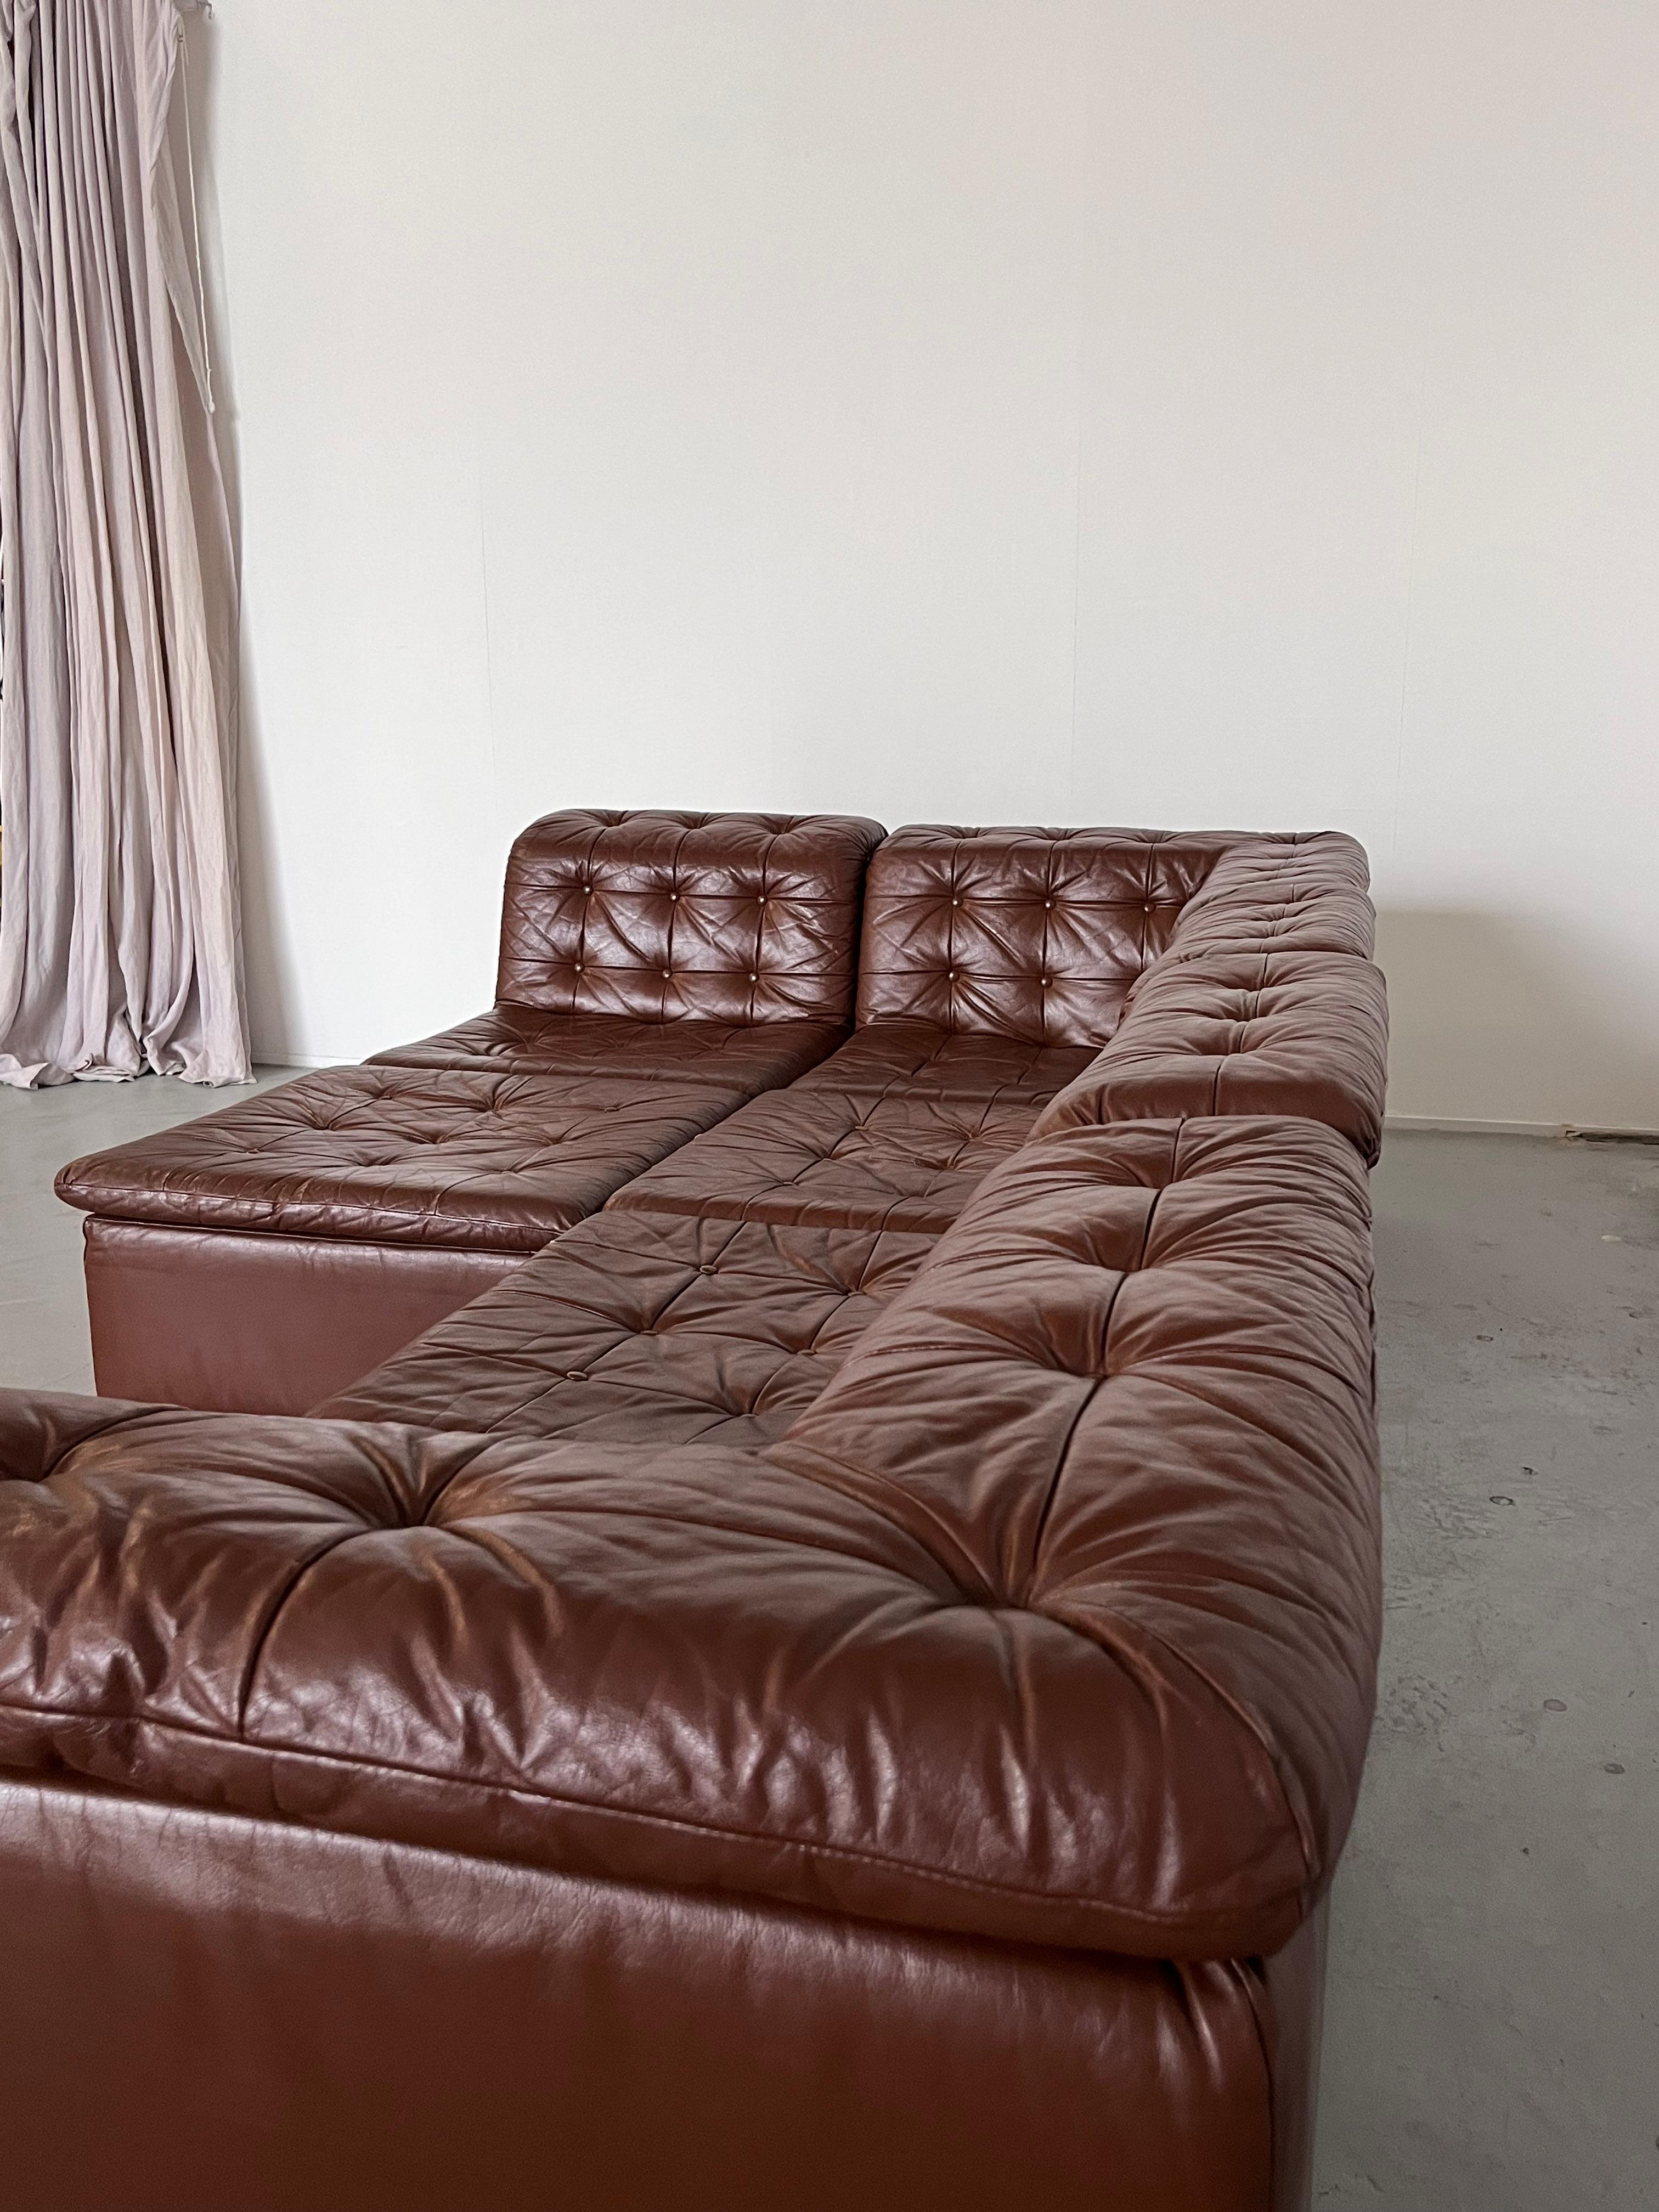 Vintage Patchwork Cognac Leather Six-Part Modular Sofa by Laauser, 1970s Germany For Sale 11